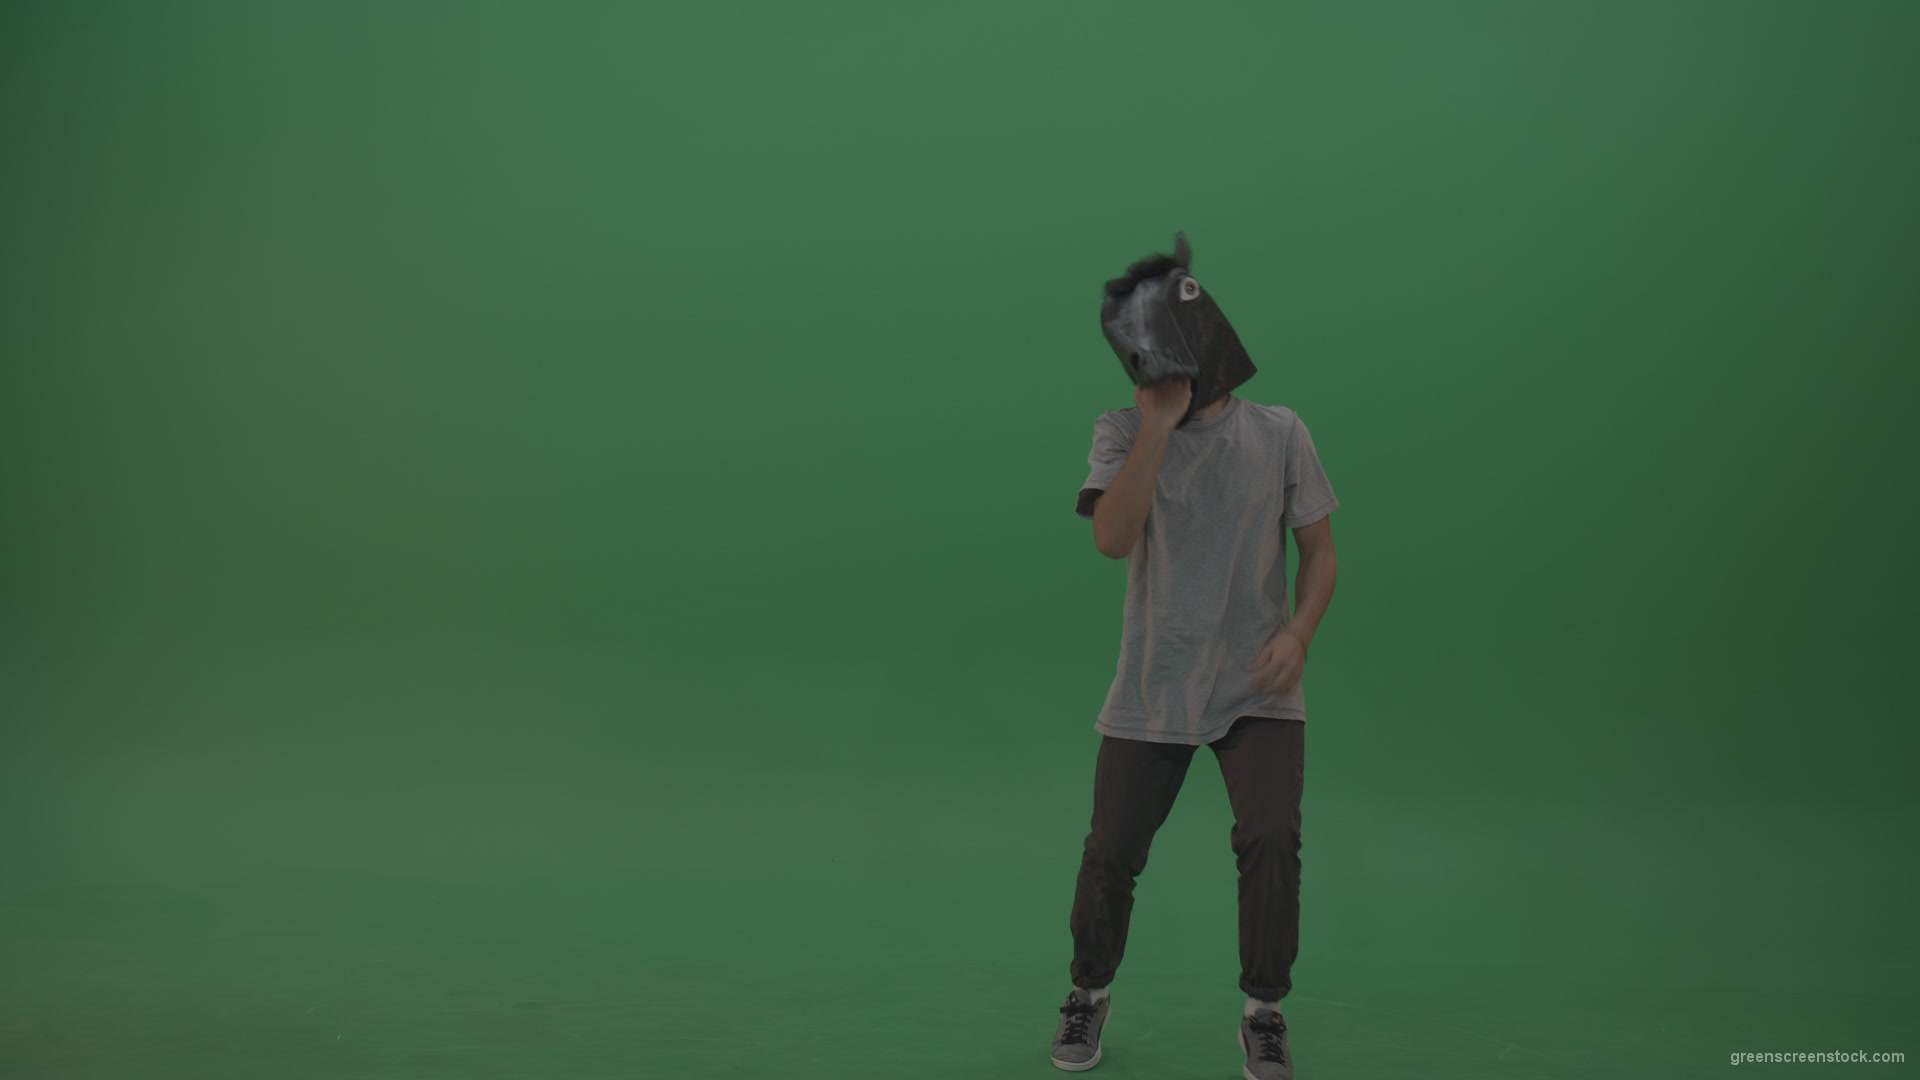 Boy-in-grey-wear-and-horse-head-costume-dances-over-green-screen-background_009 Green Screen Stock